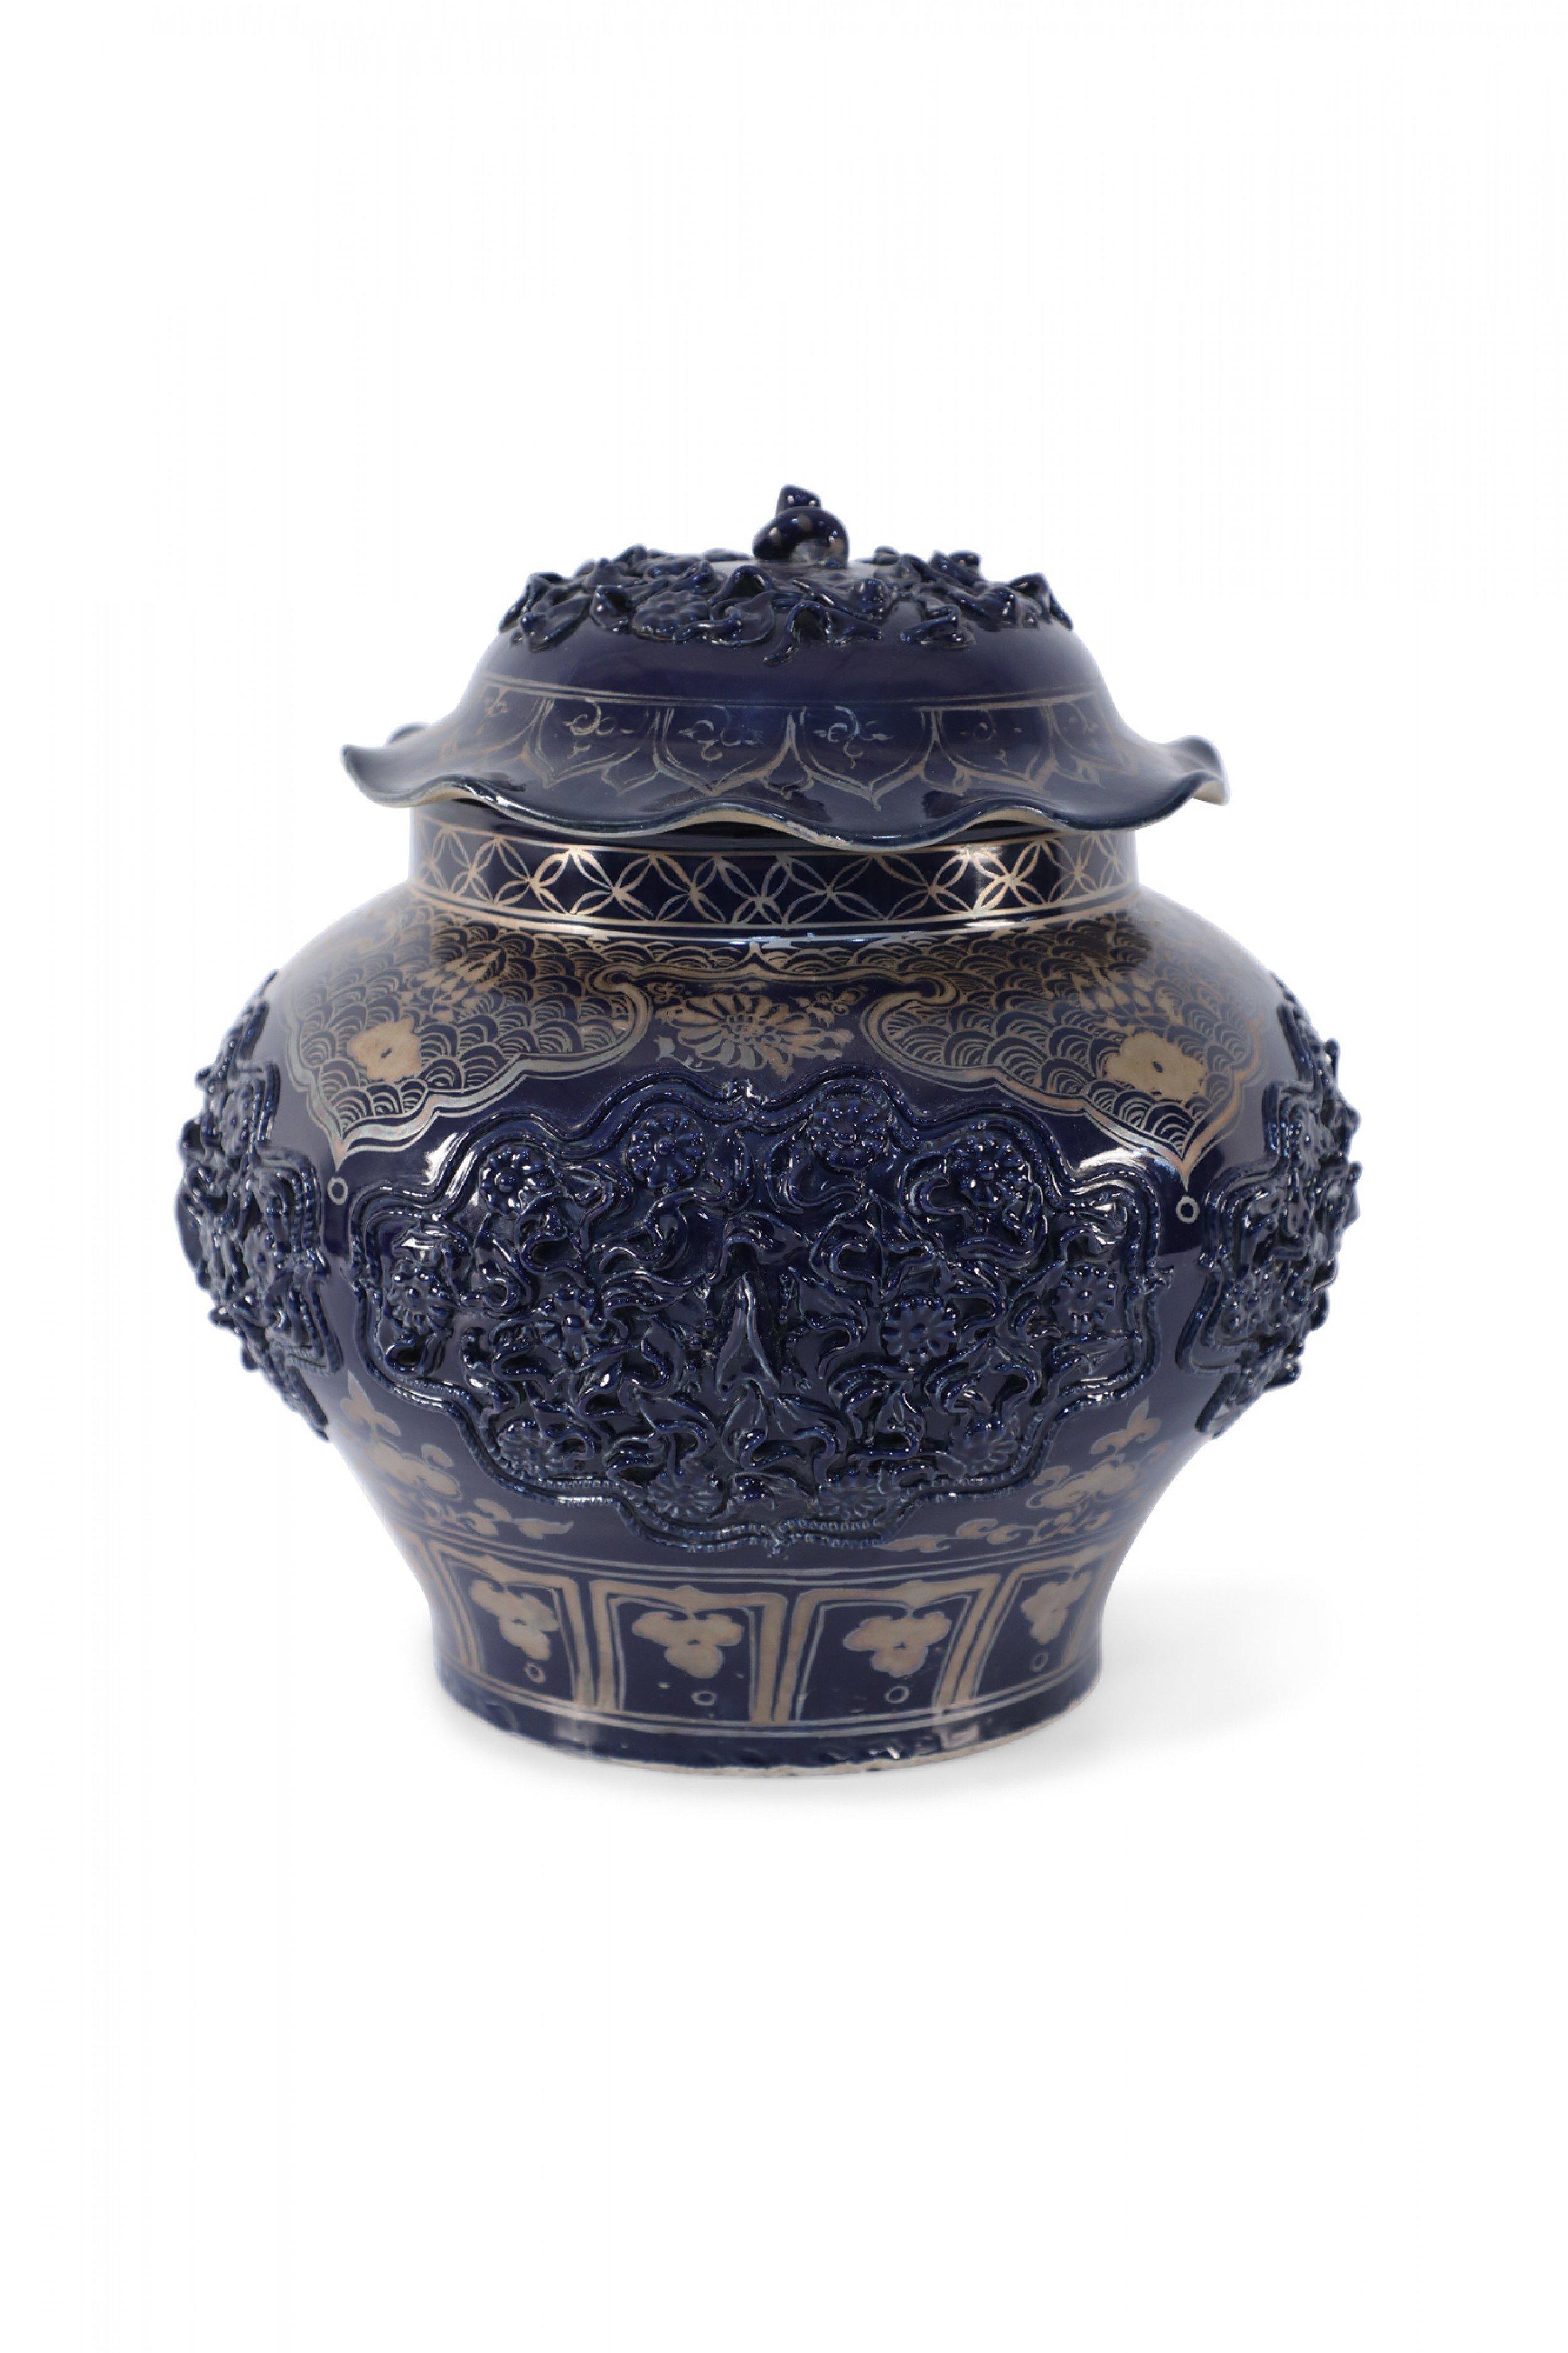 Vintage Chinese dark blue porcelain pot decorated with a combination of intricate gold painting and raised medallions of florals, each with a beetle in the center, and a stem emerging from the top of the lid.